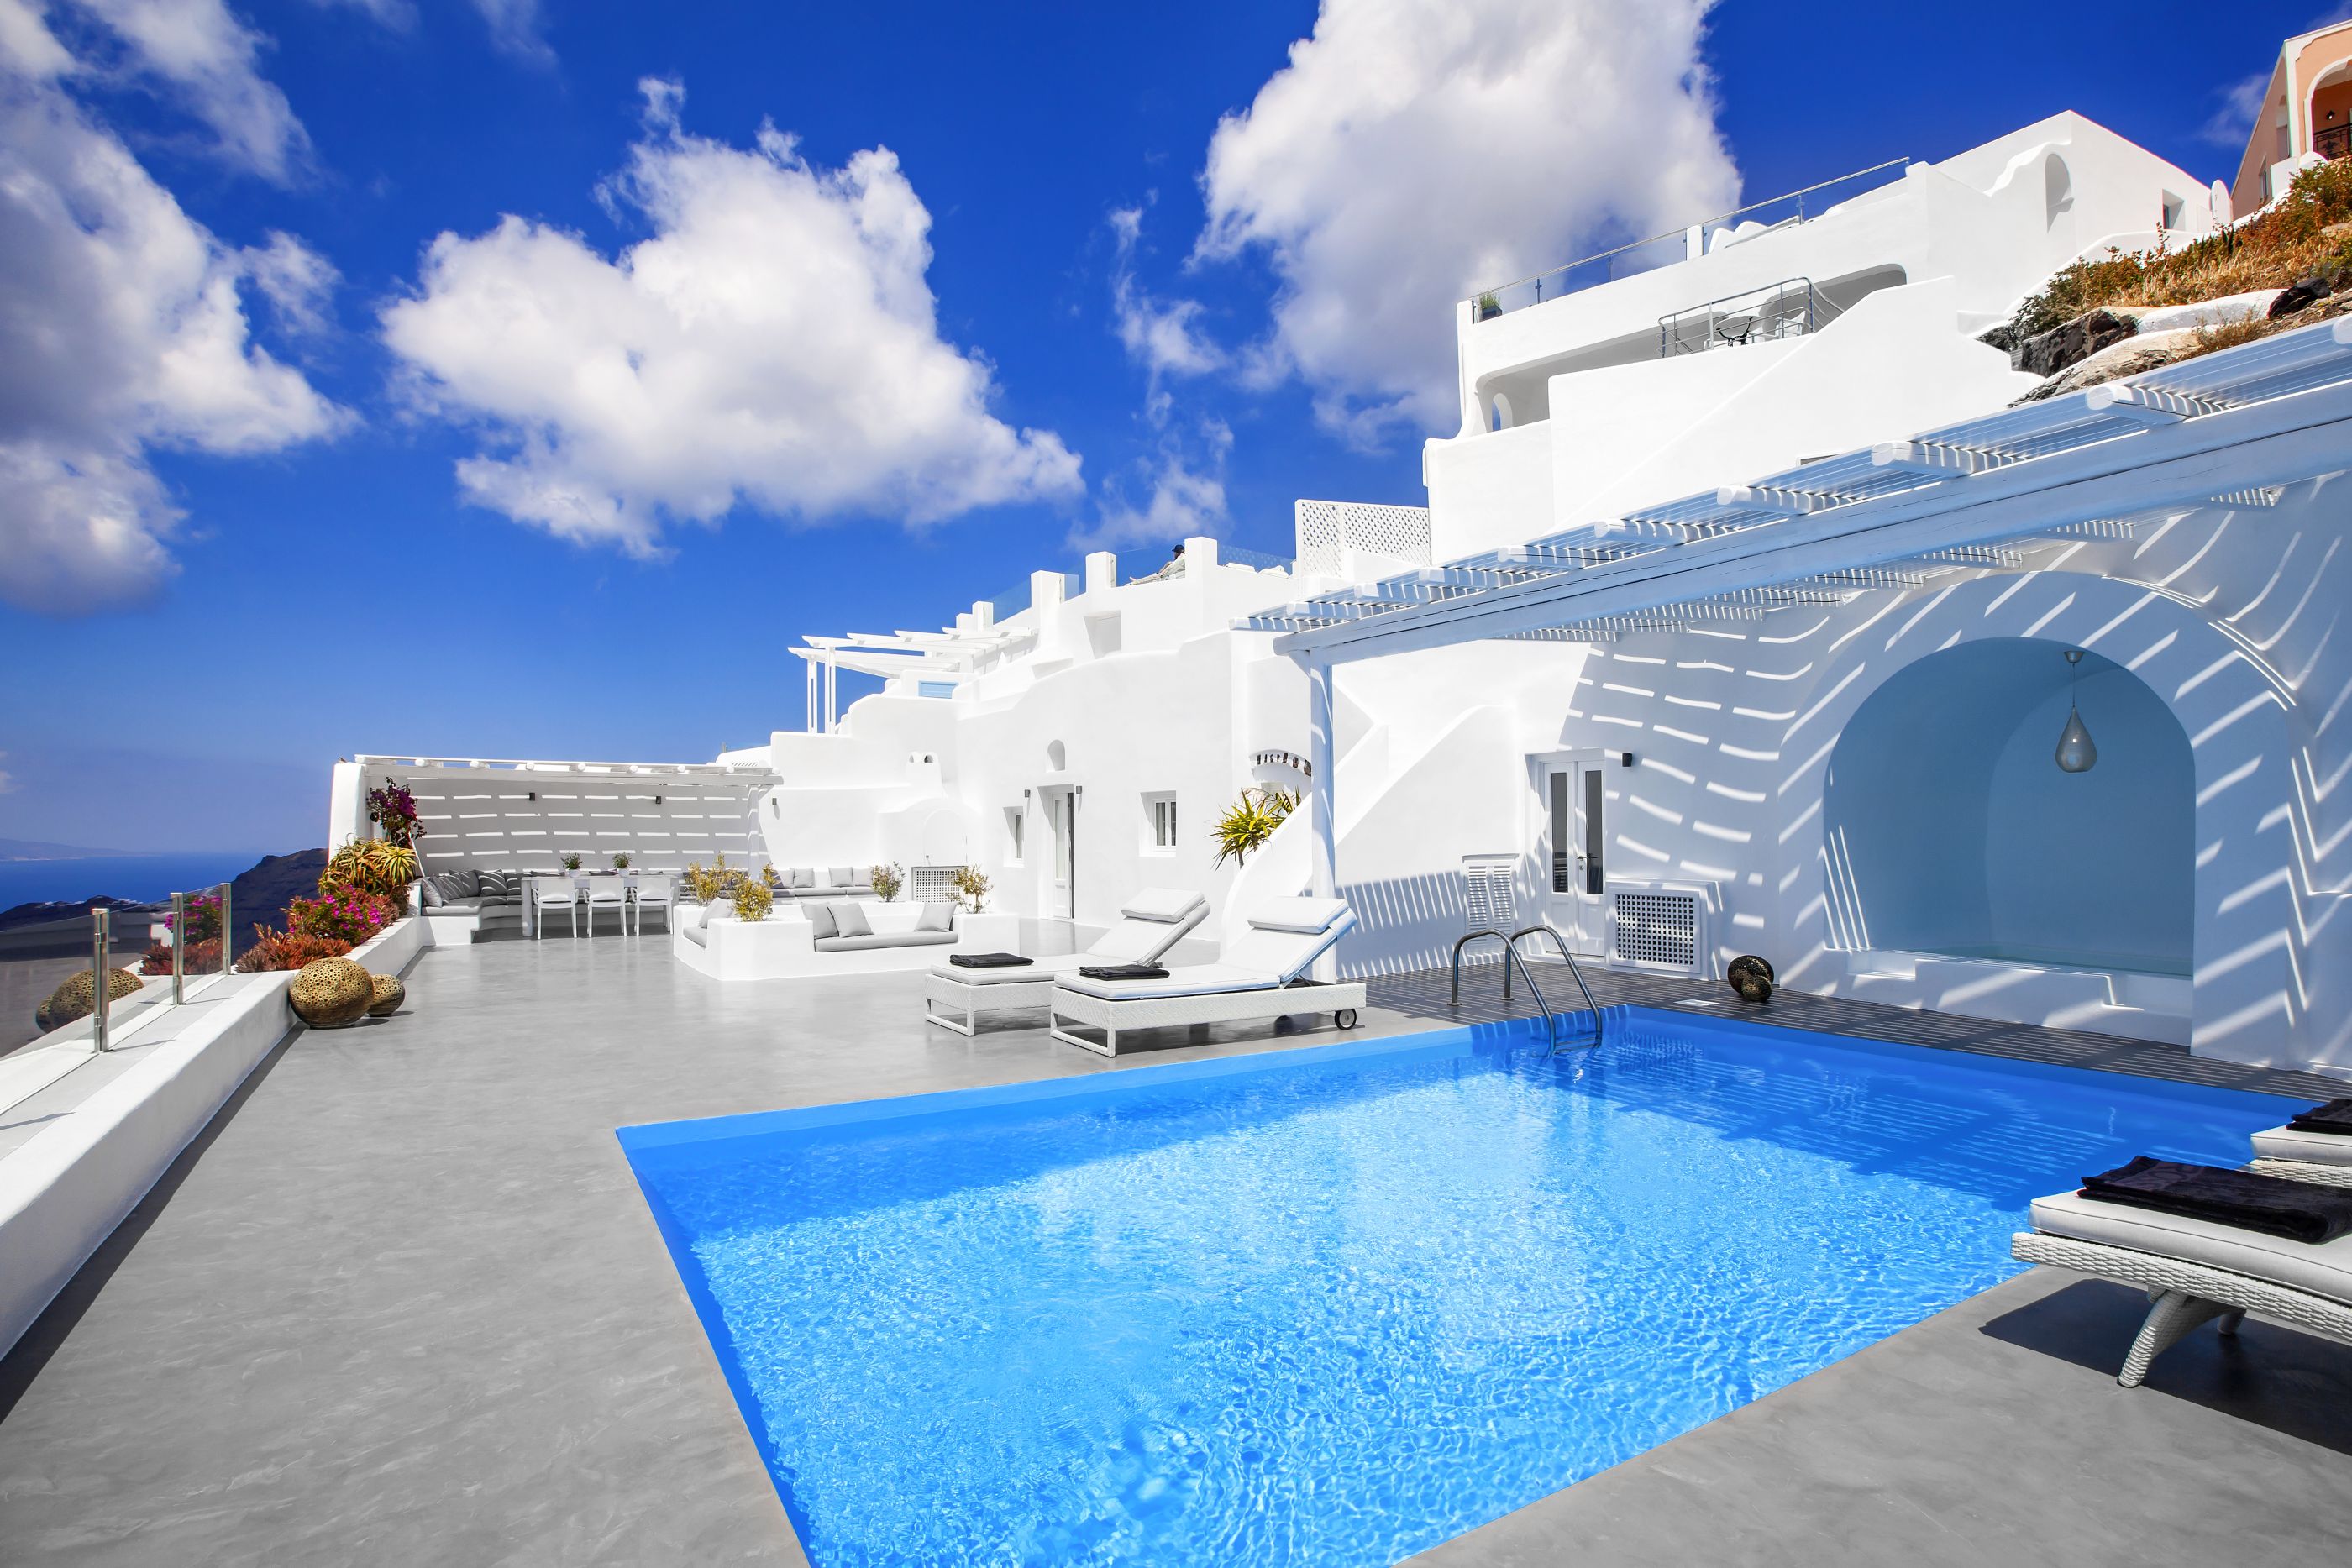 Exteriors and swimming pool of Erossea, Greece